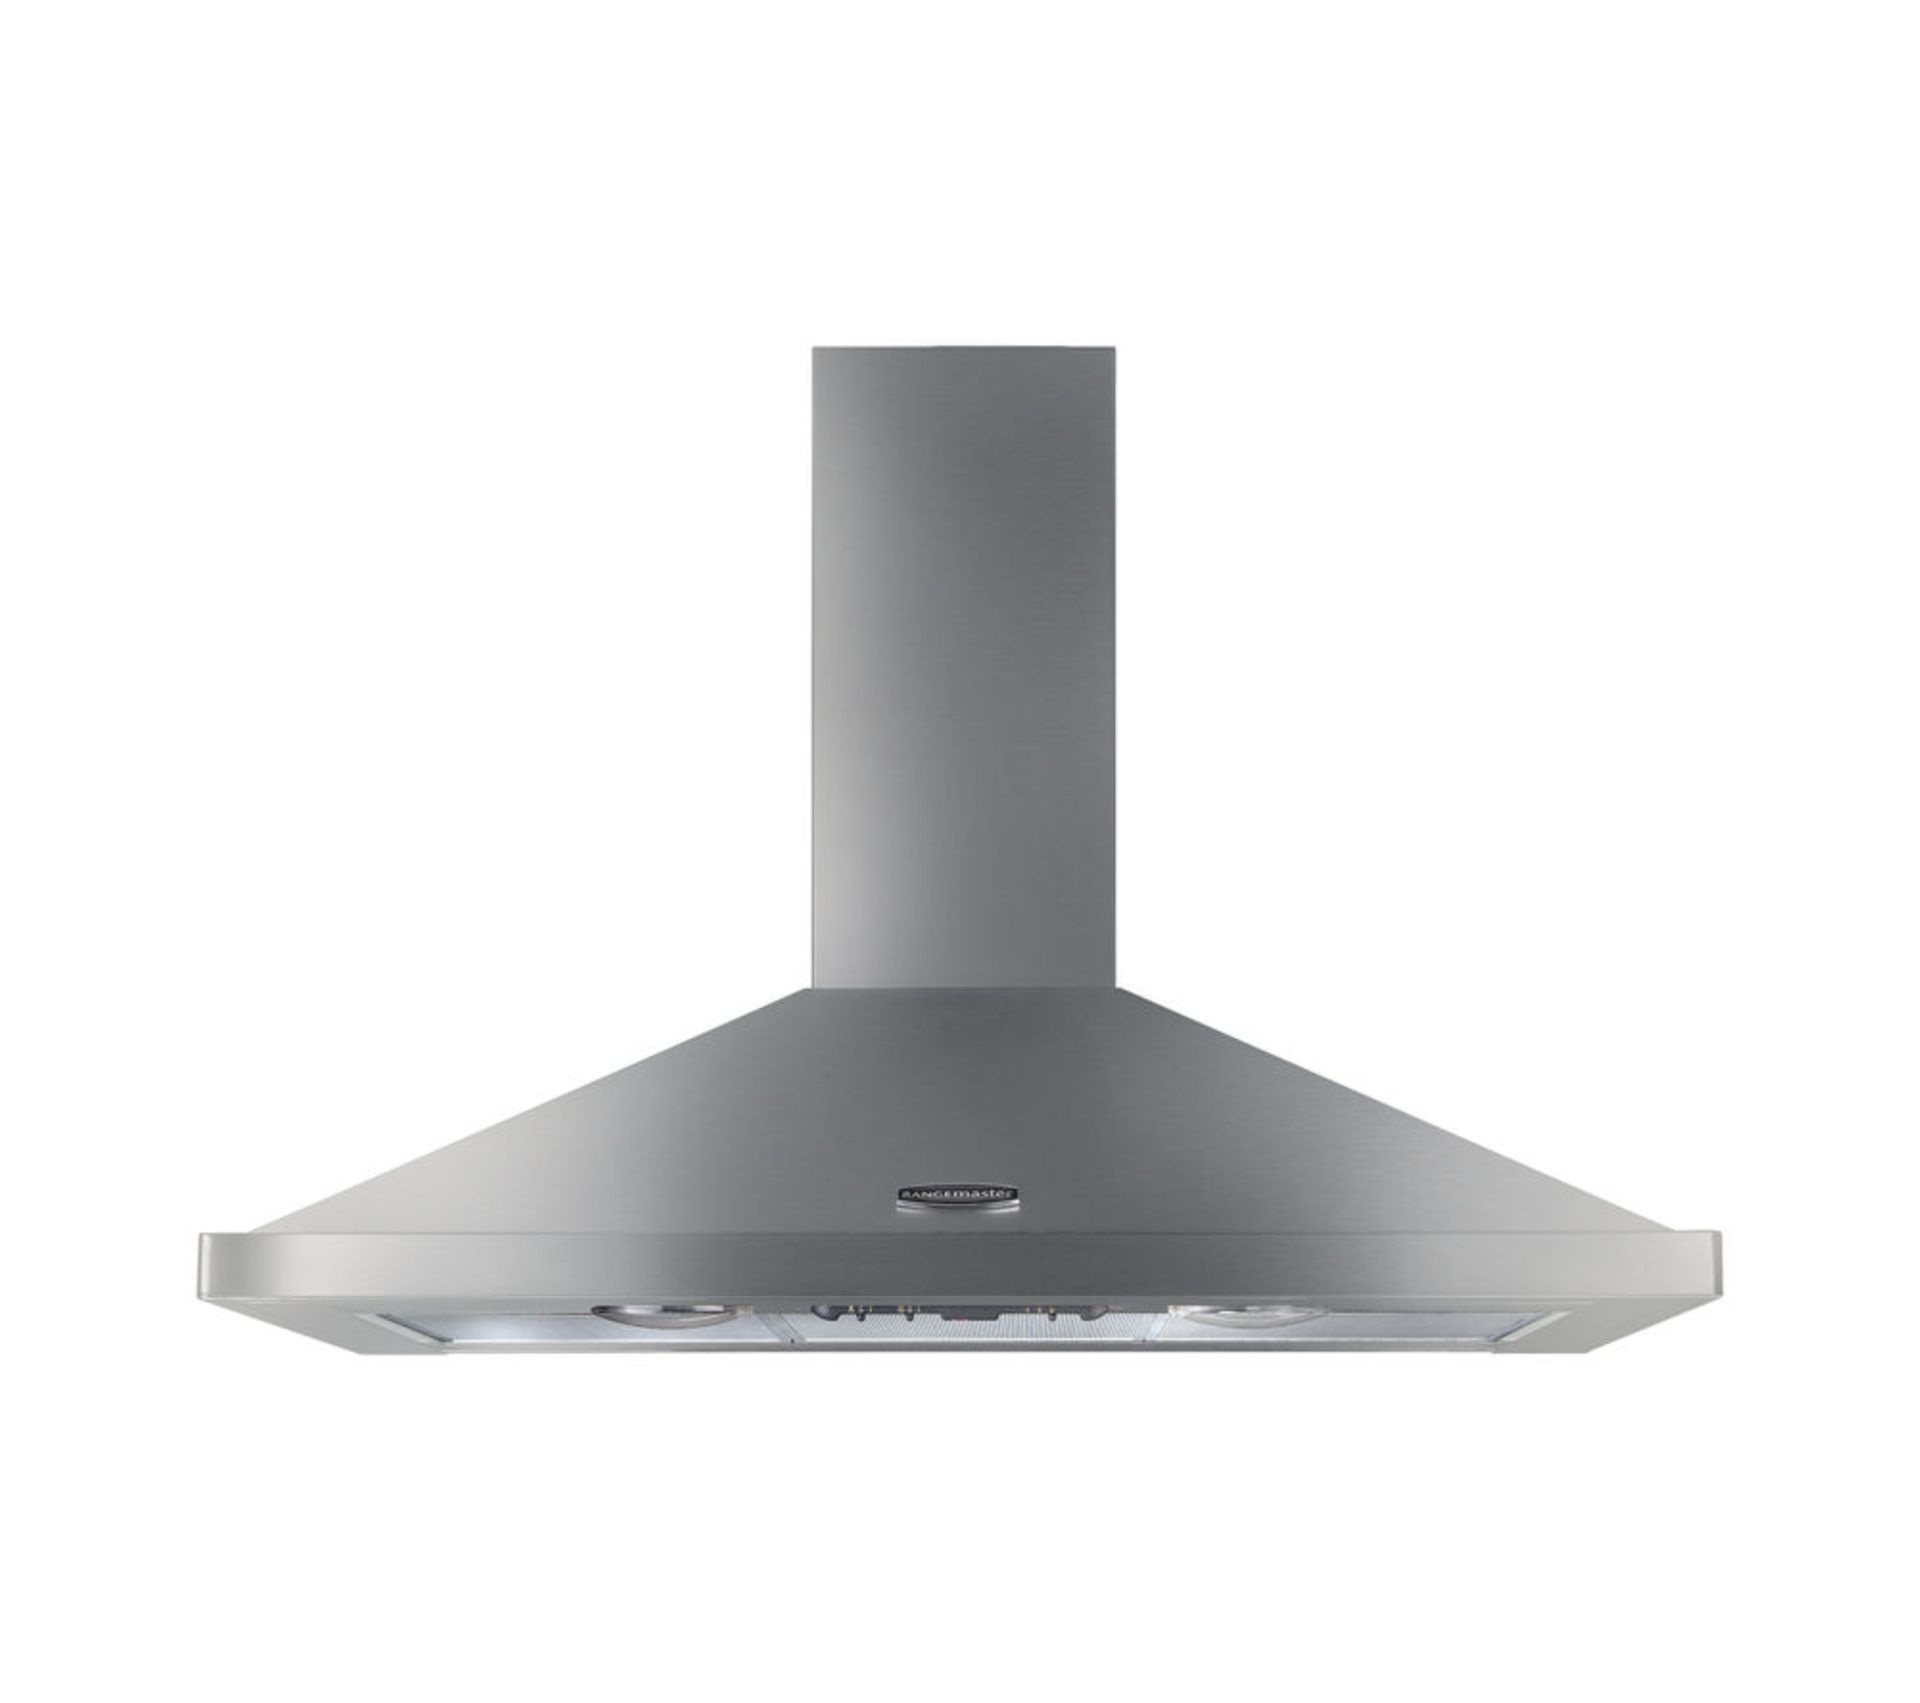 1 x BOXED RANGE MASTER LEIHD6C110SC CHIMNEY COOKER HOOD RRP £515 (19.4.17)(1008) *PLEASE NOTE THAT